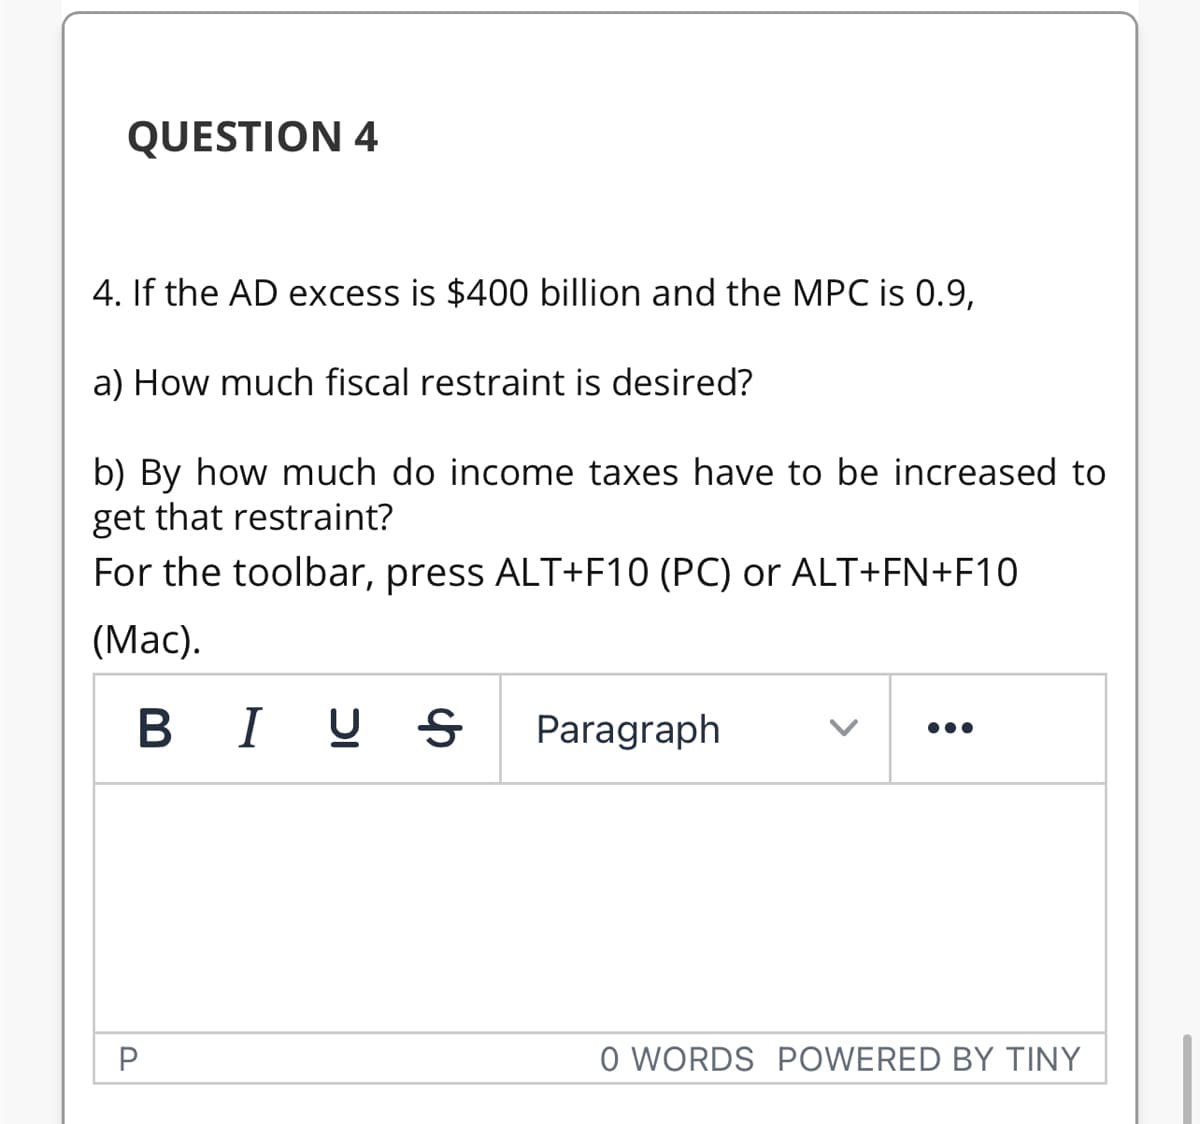 QUESTION 4
4. If the AD excess is $400 billion and the MPC is 0.9,
a) How much fiscal restraint is desired?
b) By how much do income taxes have to be increased to
get that restraint?
For the toolbar, press ALT+F10 (PC) or ALT+FN+F10
(Mac).
BI U
Paragraph
•..
P
O WORDS POWERED BY TINY
